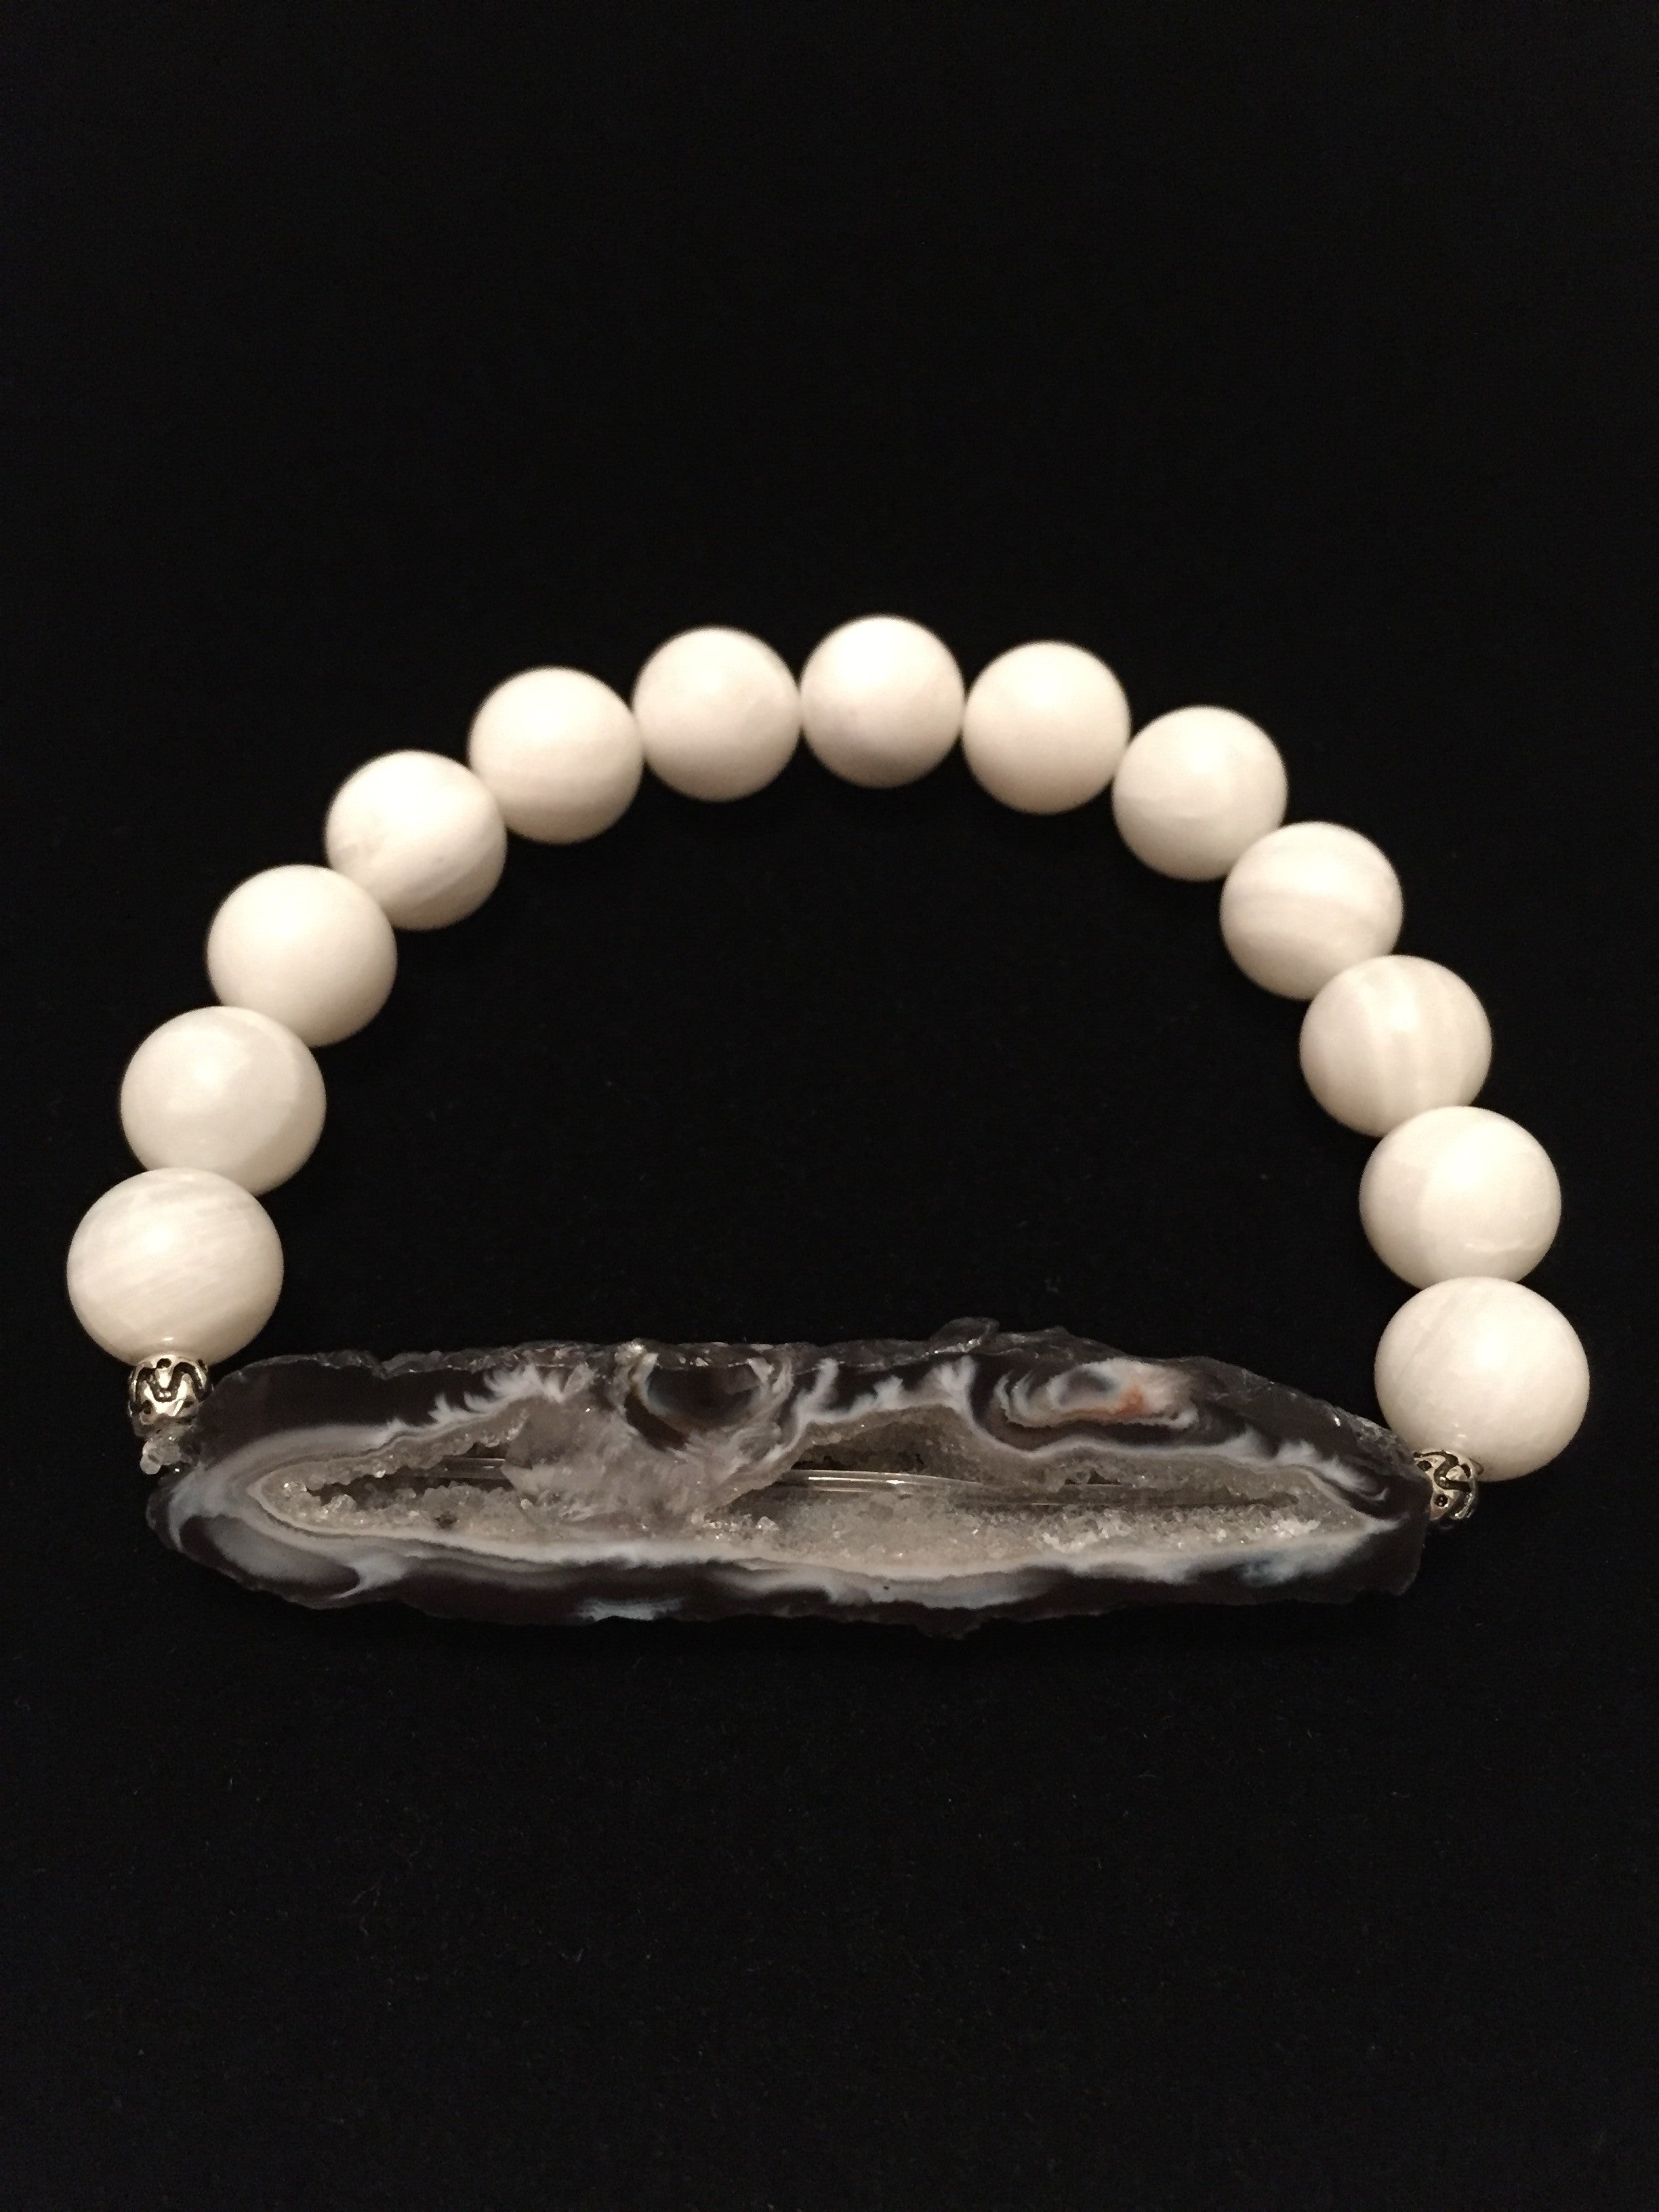 Eclectic Geode on White Onyx Eclectic Geode on White Onyx